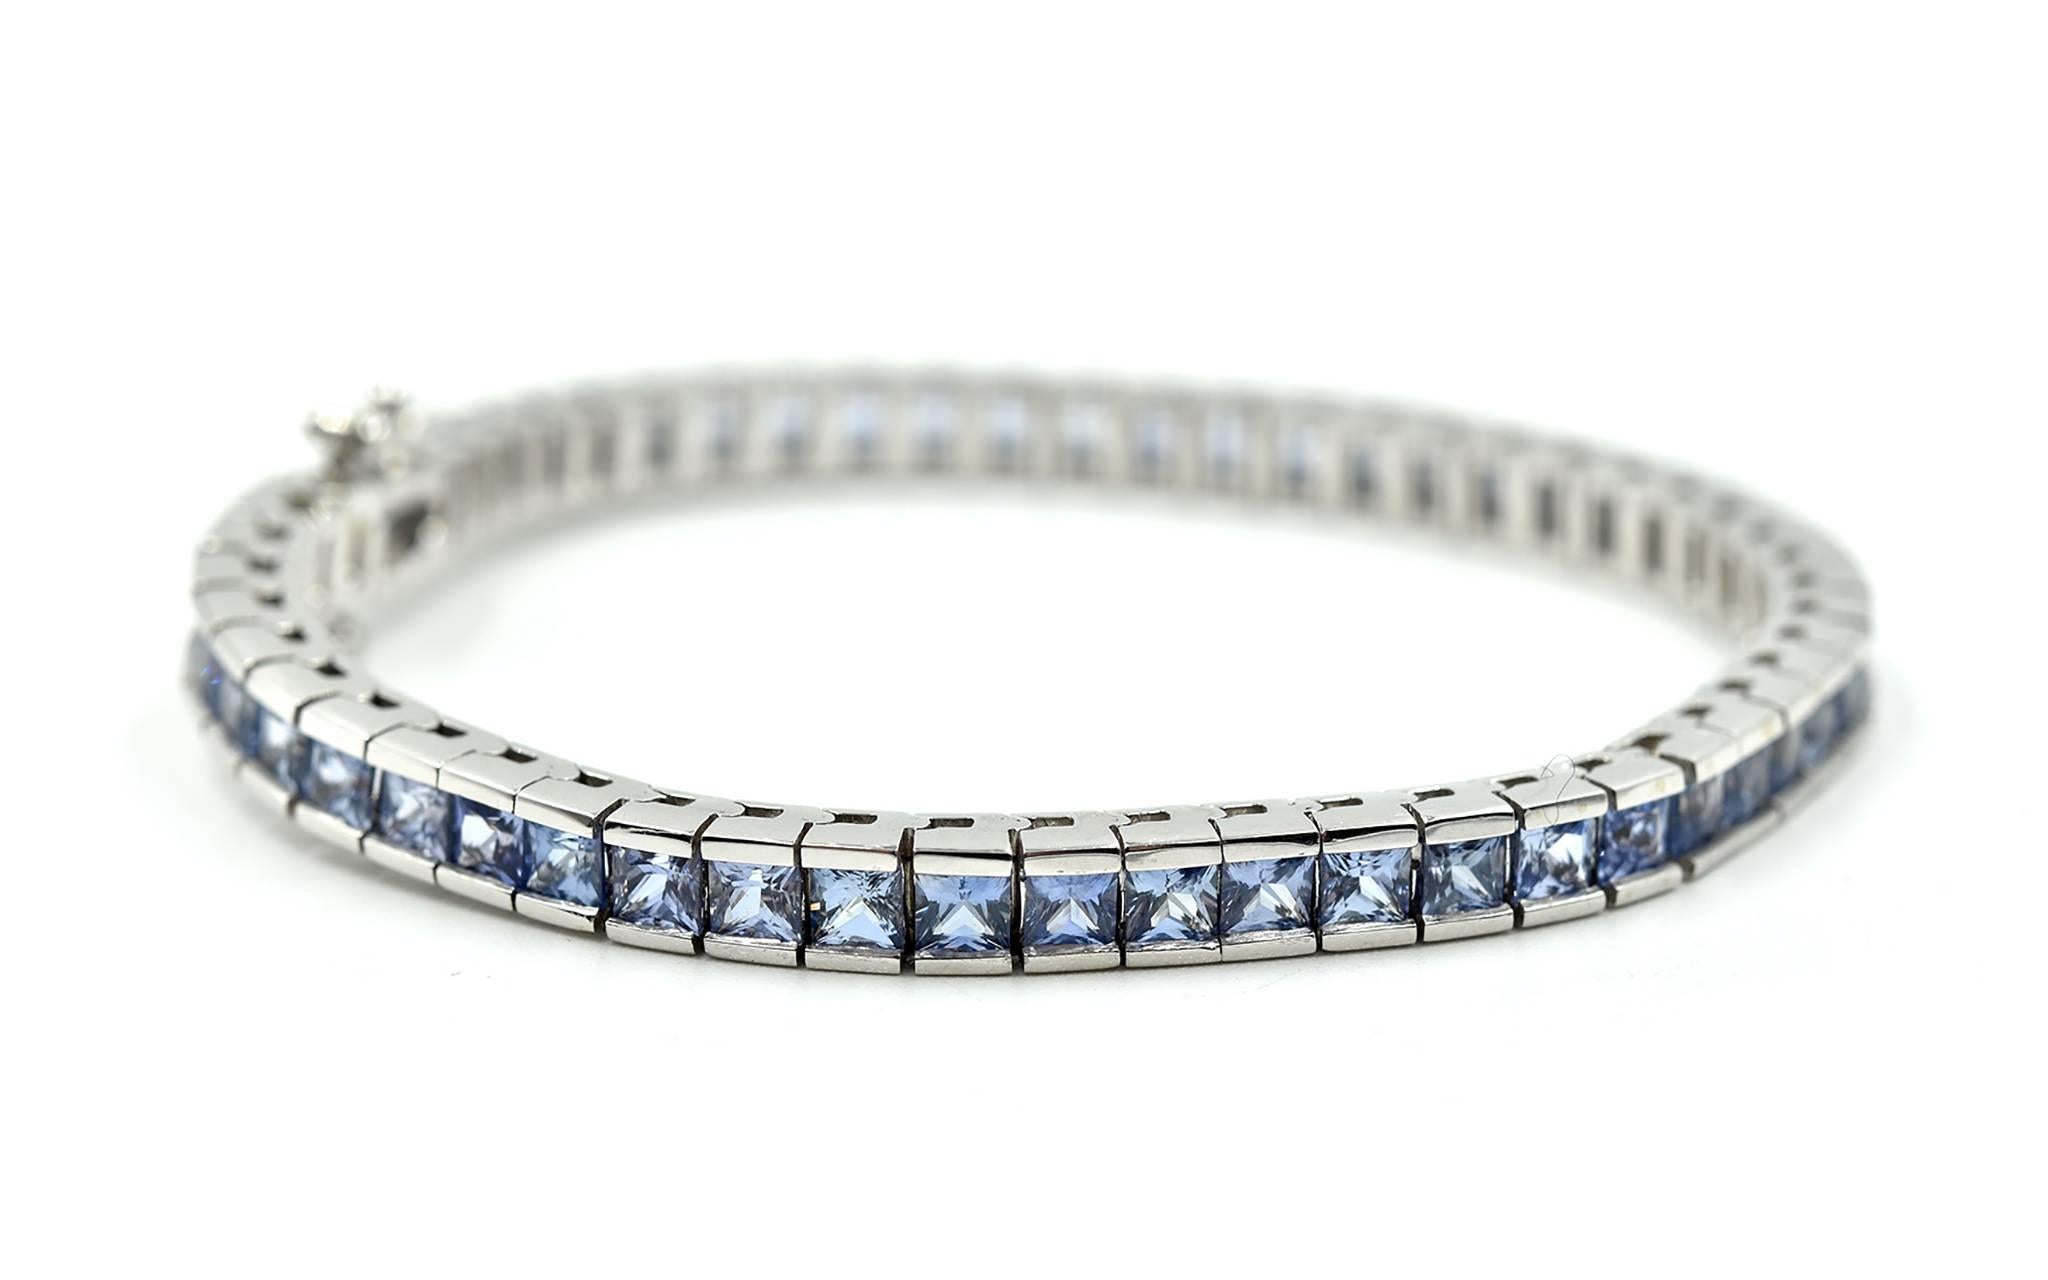 Designer: custom design
Material: 14k white gold
Blue Sapphires: 55 square cuts = 10.10 carat total weight
Dimensions: bracelet is 6 ¾ inches long and ¼ an inch wide
Weight: 21.60 grams
